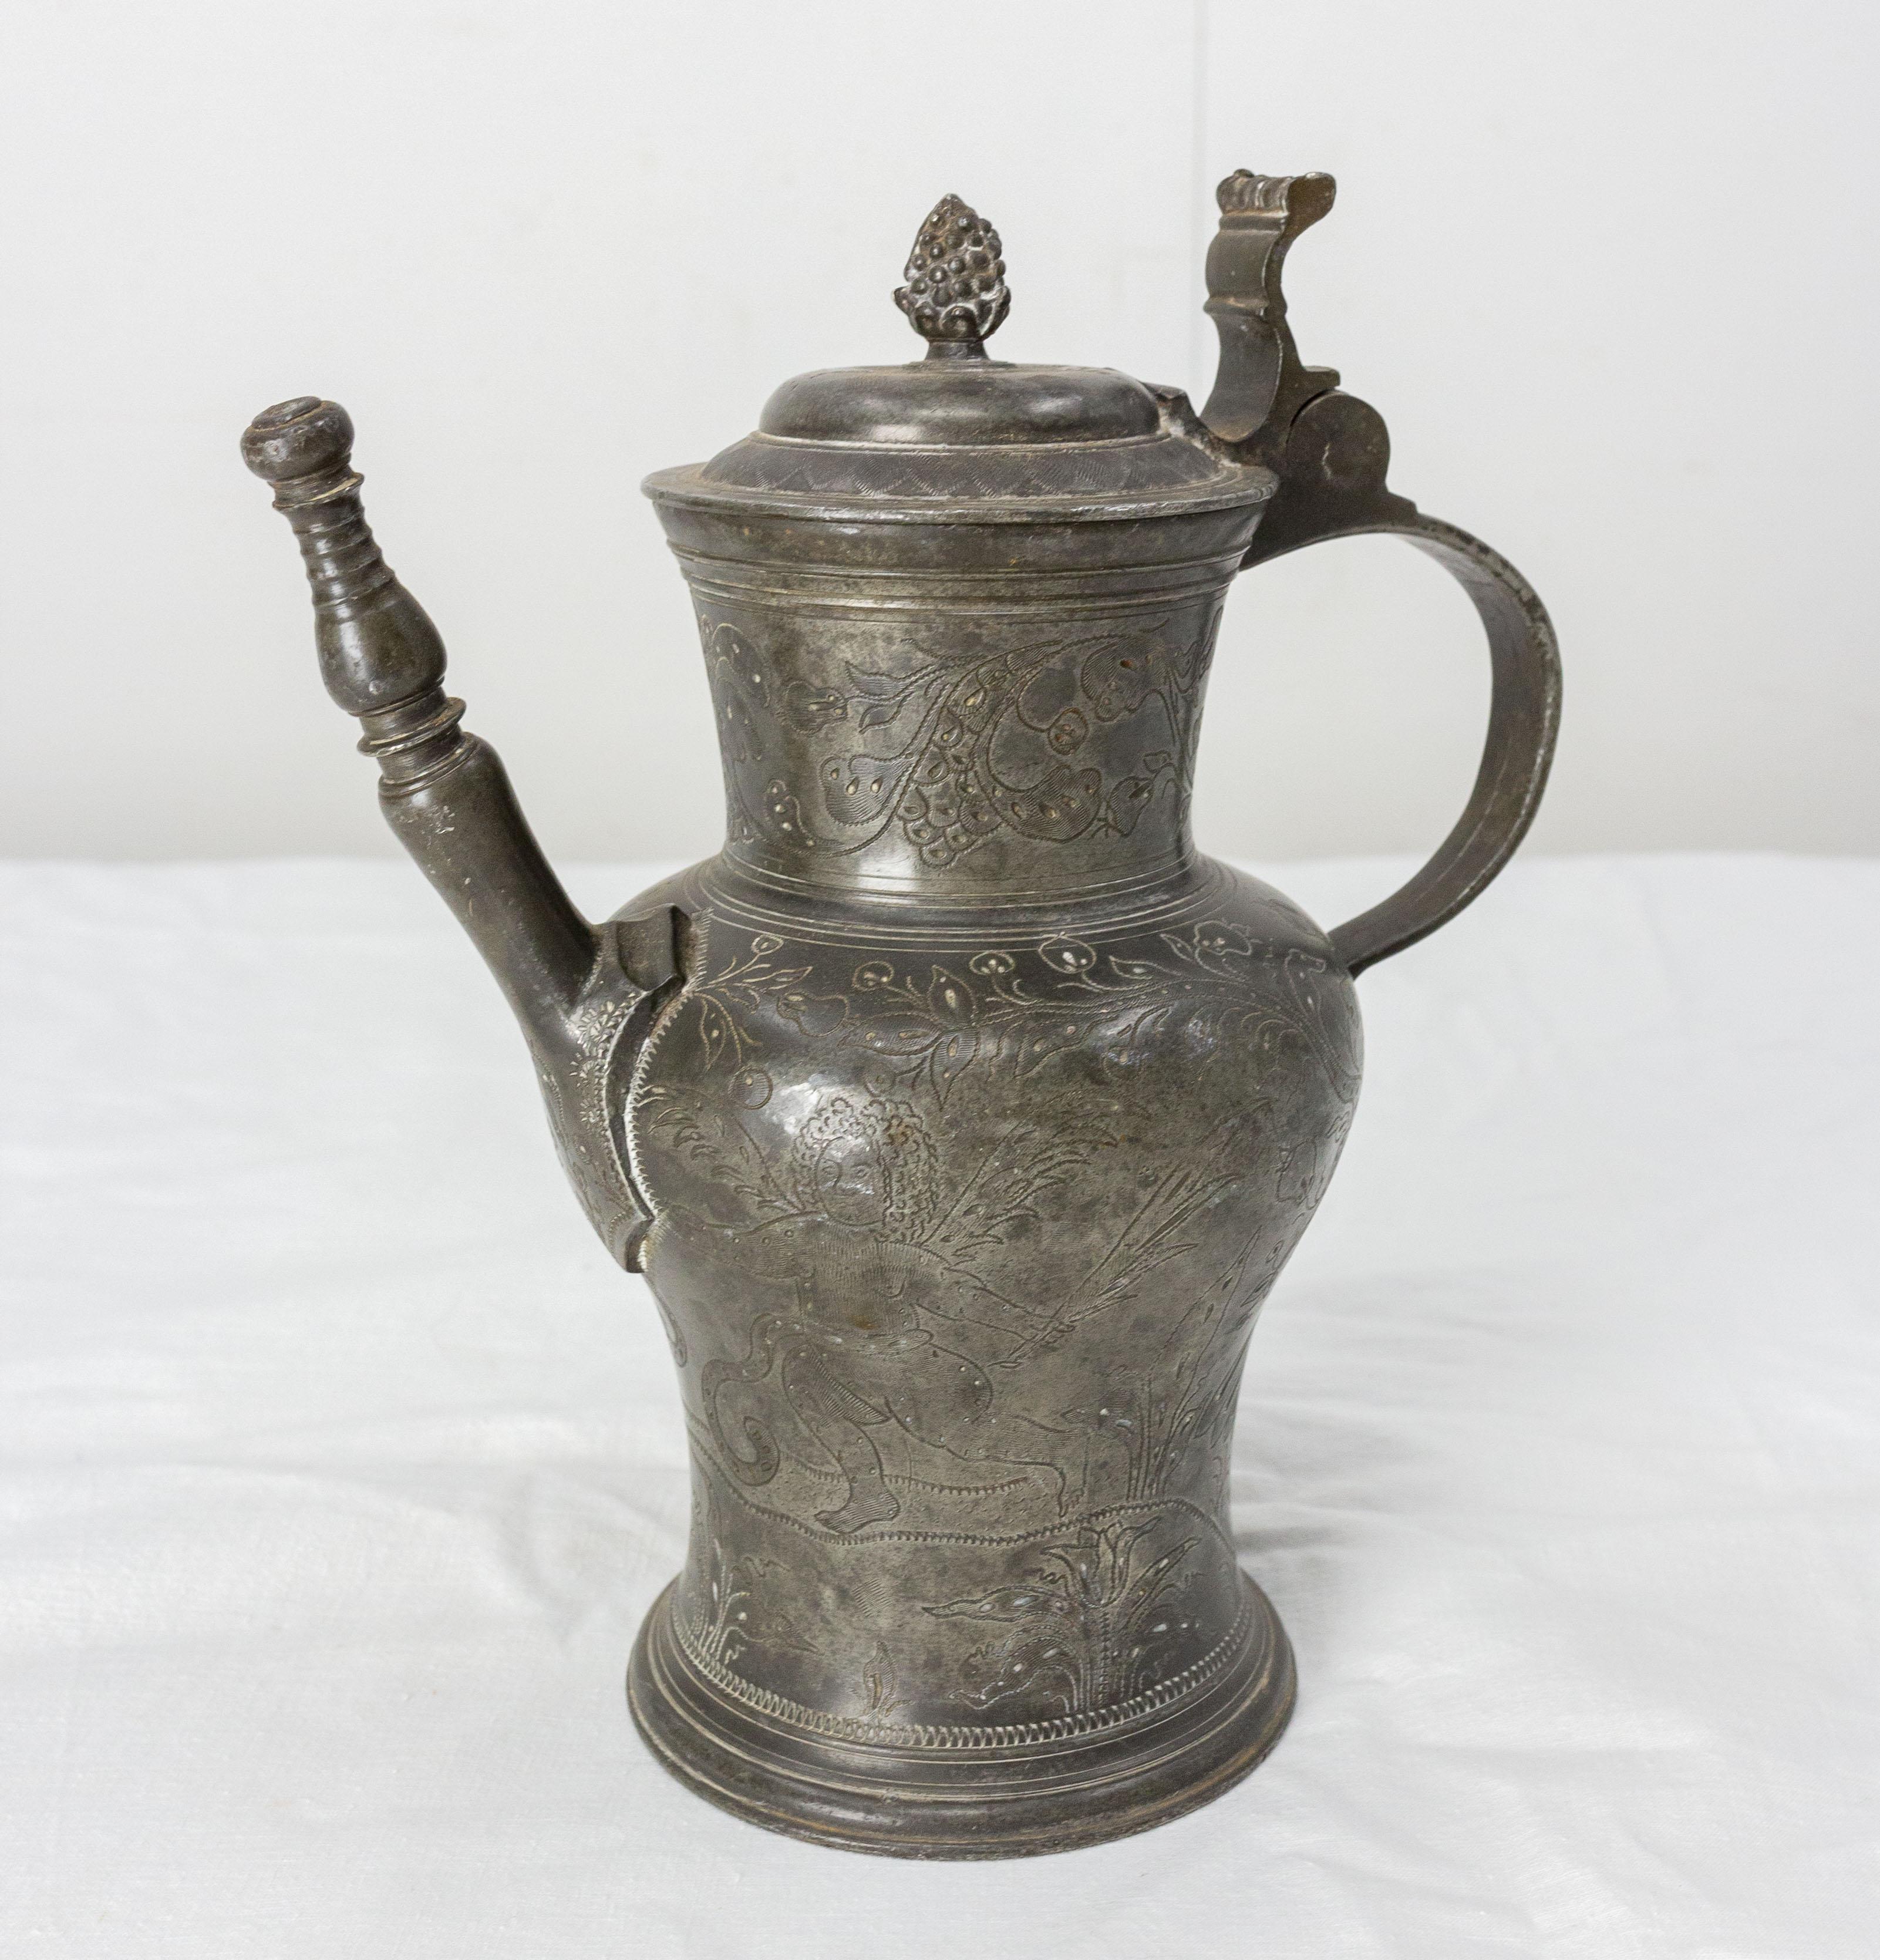 Rare Angel Pewter wine pitcher 19th century center piece.
Angel and vegetal motifs with a lid.

Shipping:
L19,5 P12 H22 1,08 KG.